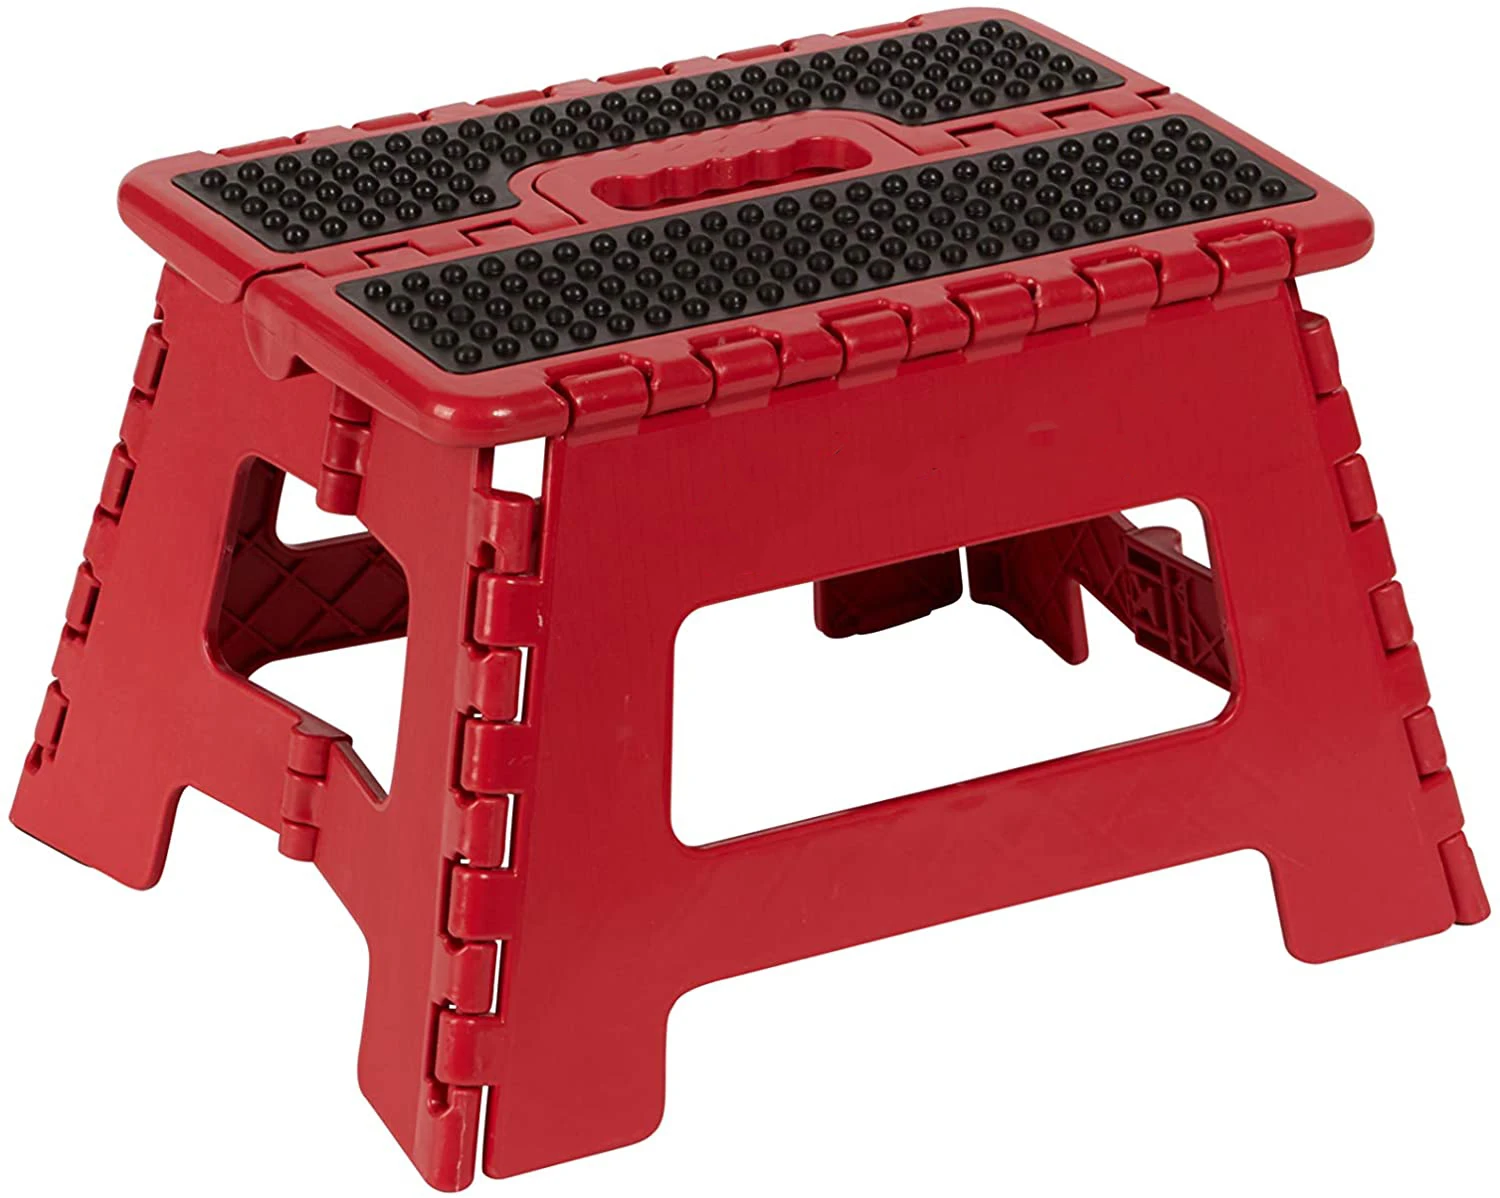 Premium Heavy Duty 8 inch Folding Step Stool for Kids and Adults, Kitchen Garden Bathroom Stepping Stool